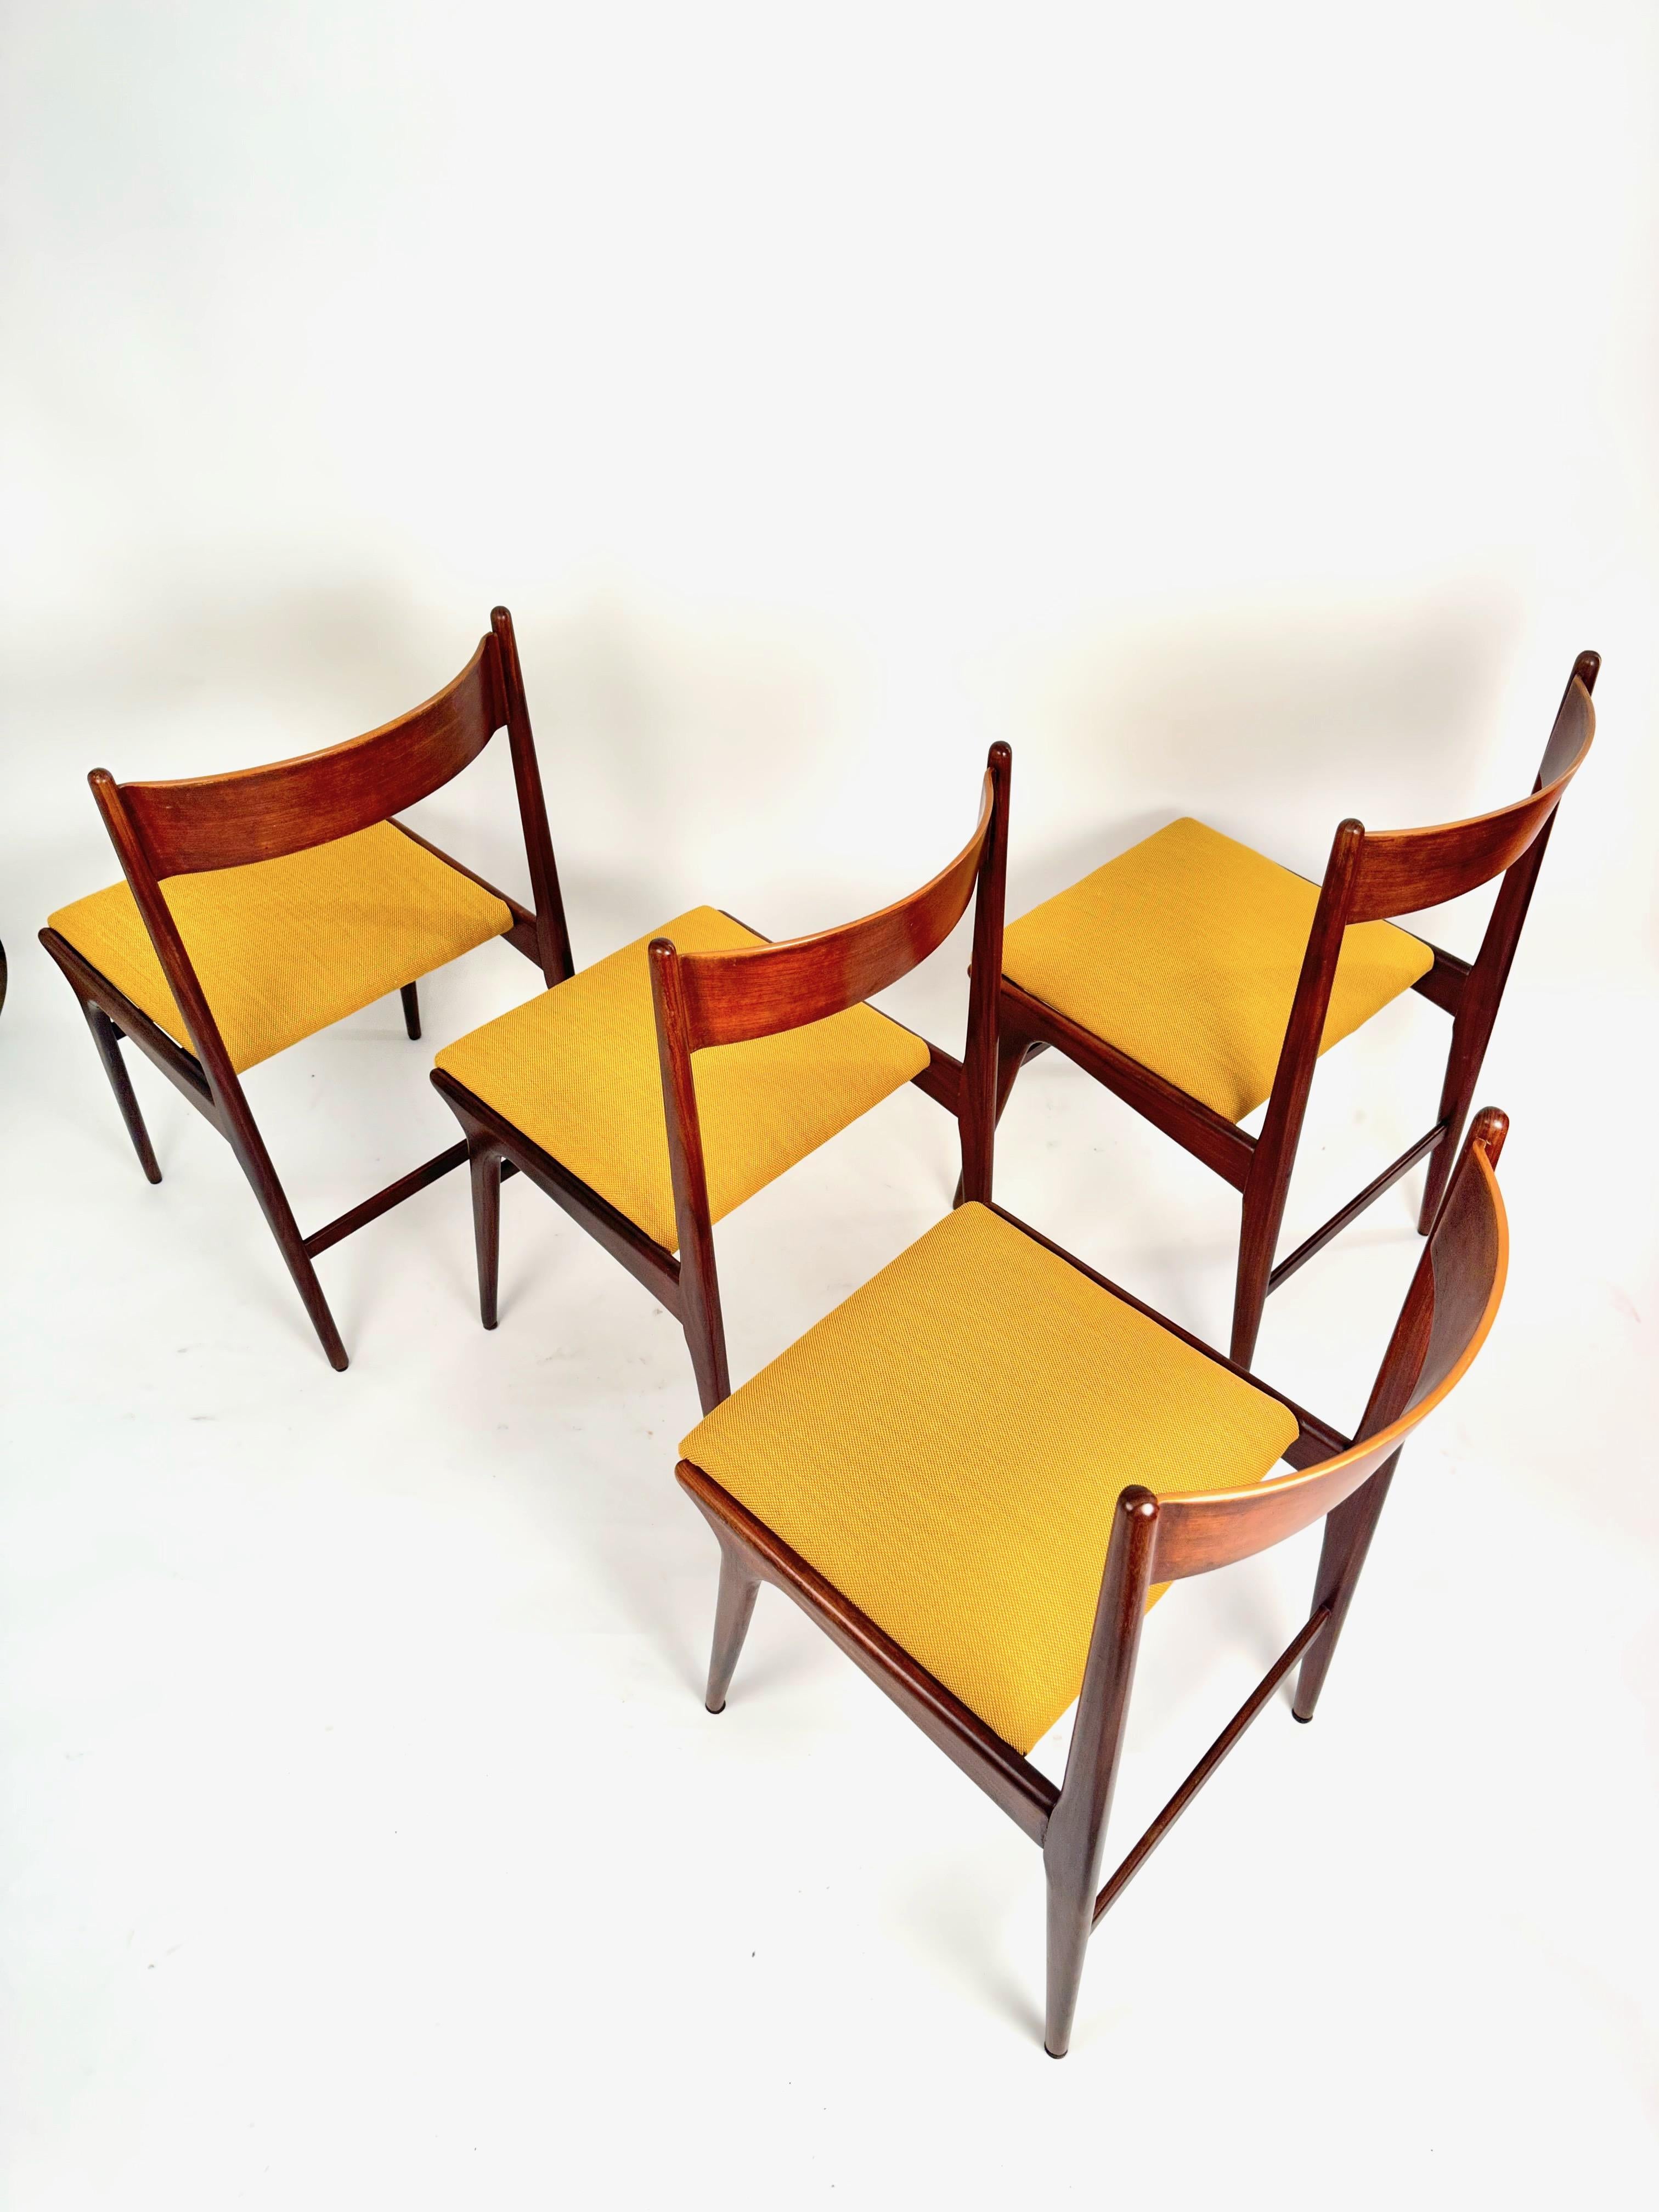 Carlo de Carli MidSet of Four Teak Dining Chairs in Kvadrat Yello Fabric, 1960s In Good Condition For Sale In Madrid, ES